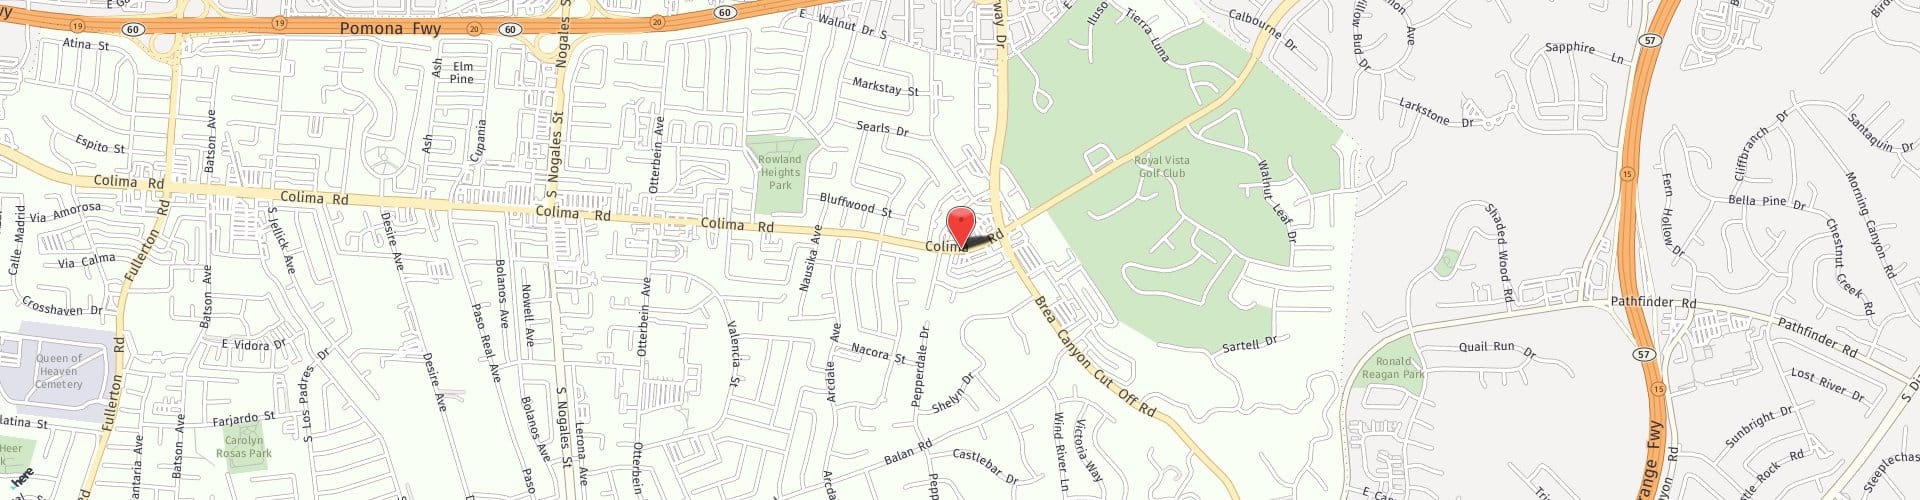 Location Map: 19728 E Colima Rd. Rowland Heights, CA 91748